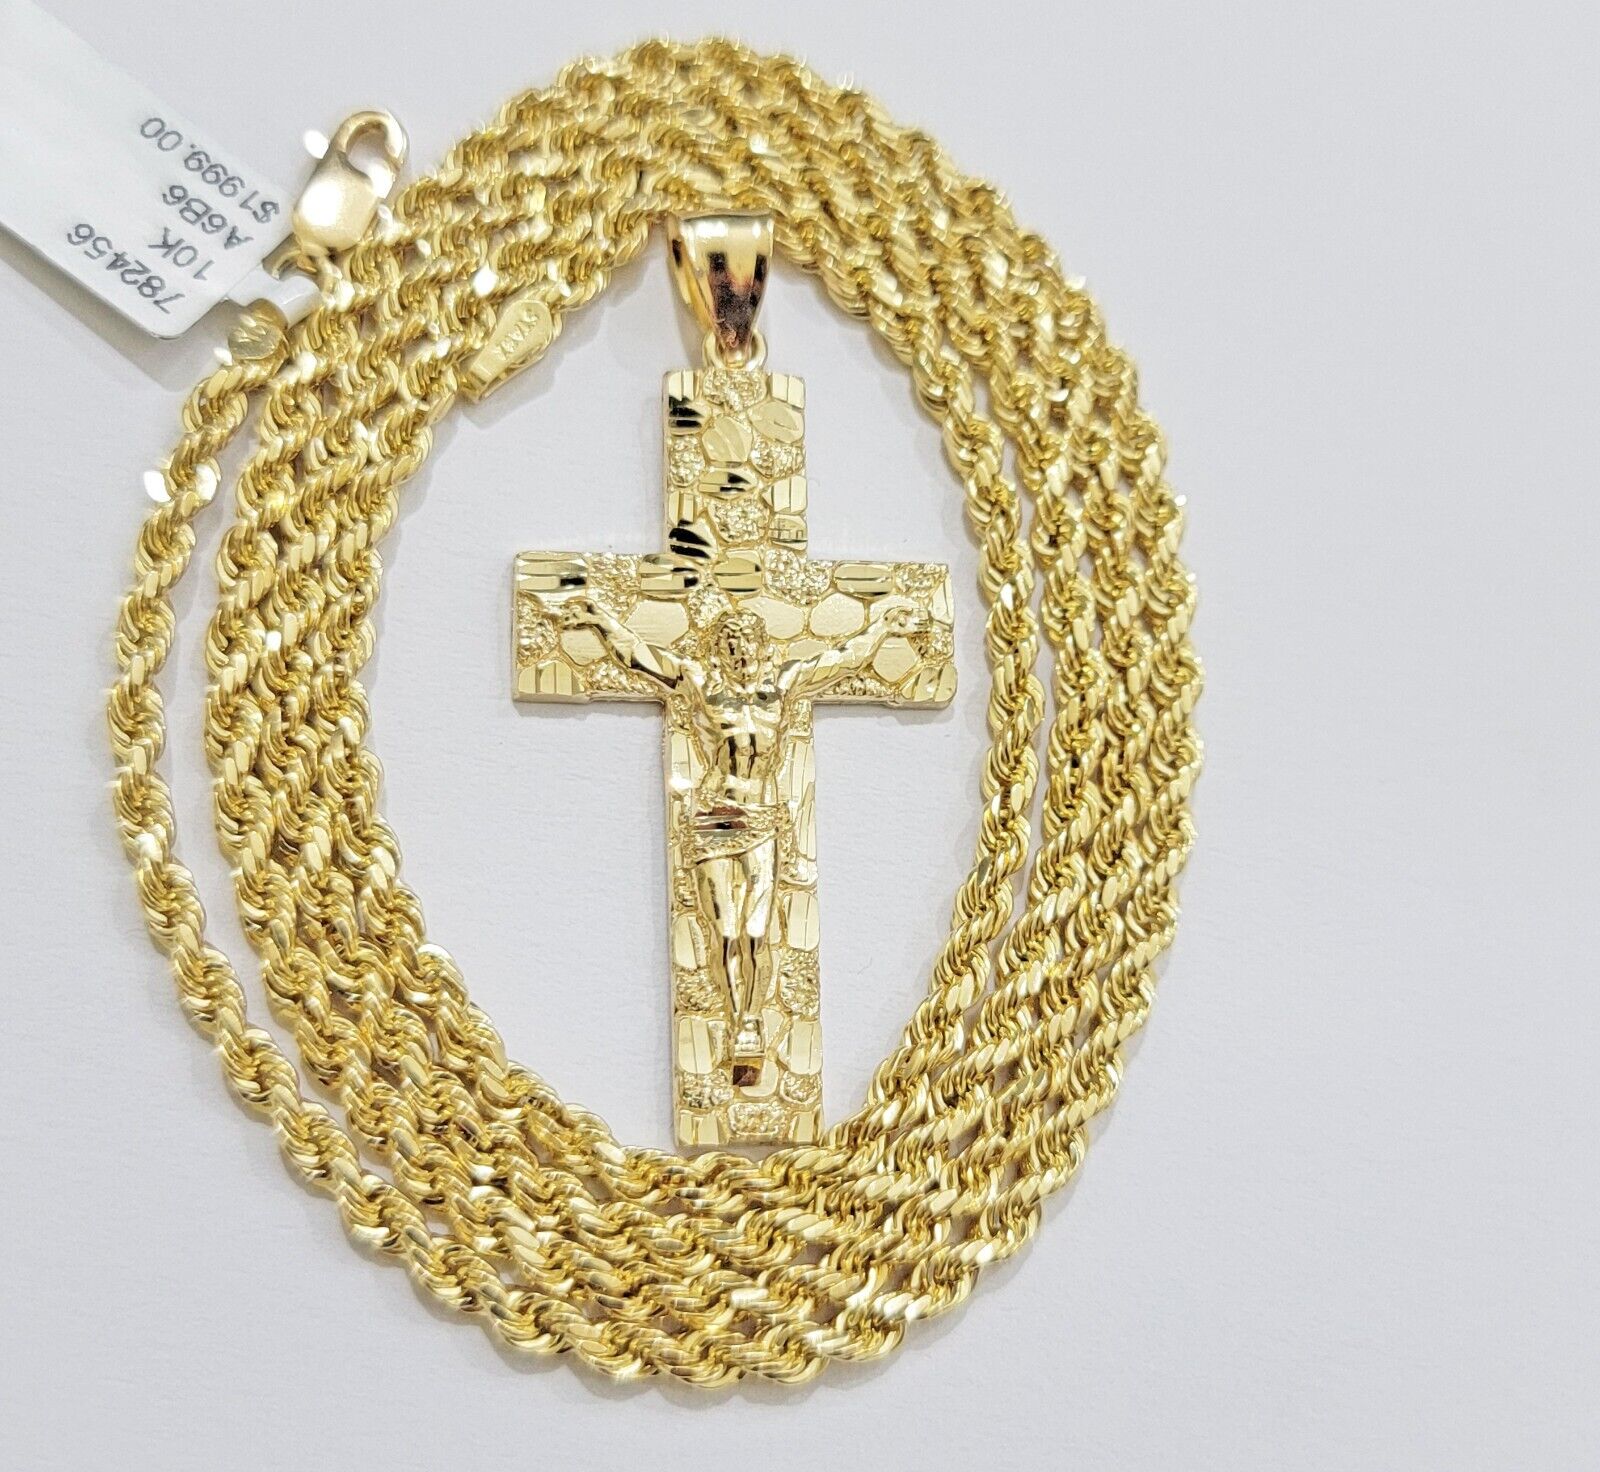 10k Yellow Gold Rope Chain Nugget Cross Charm Set 22 Inch necklace pendant, REAL